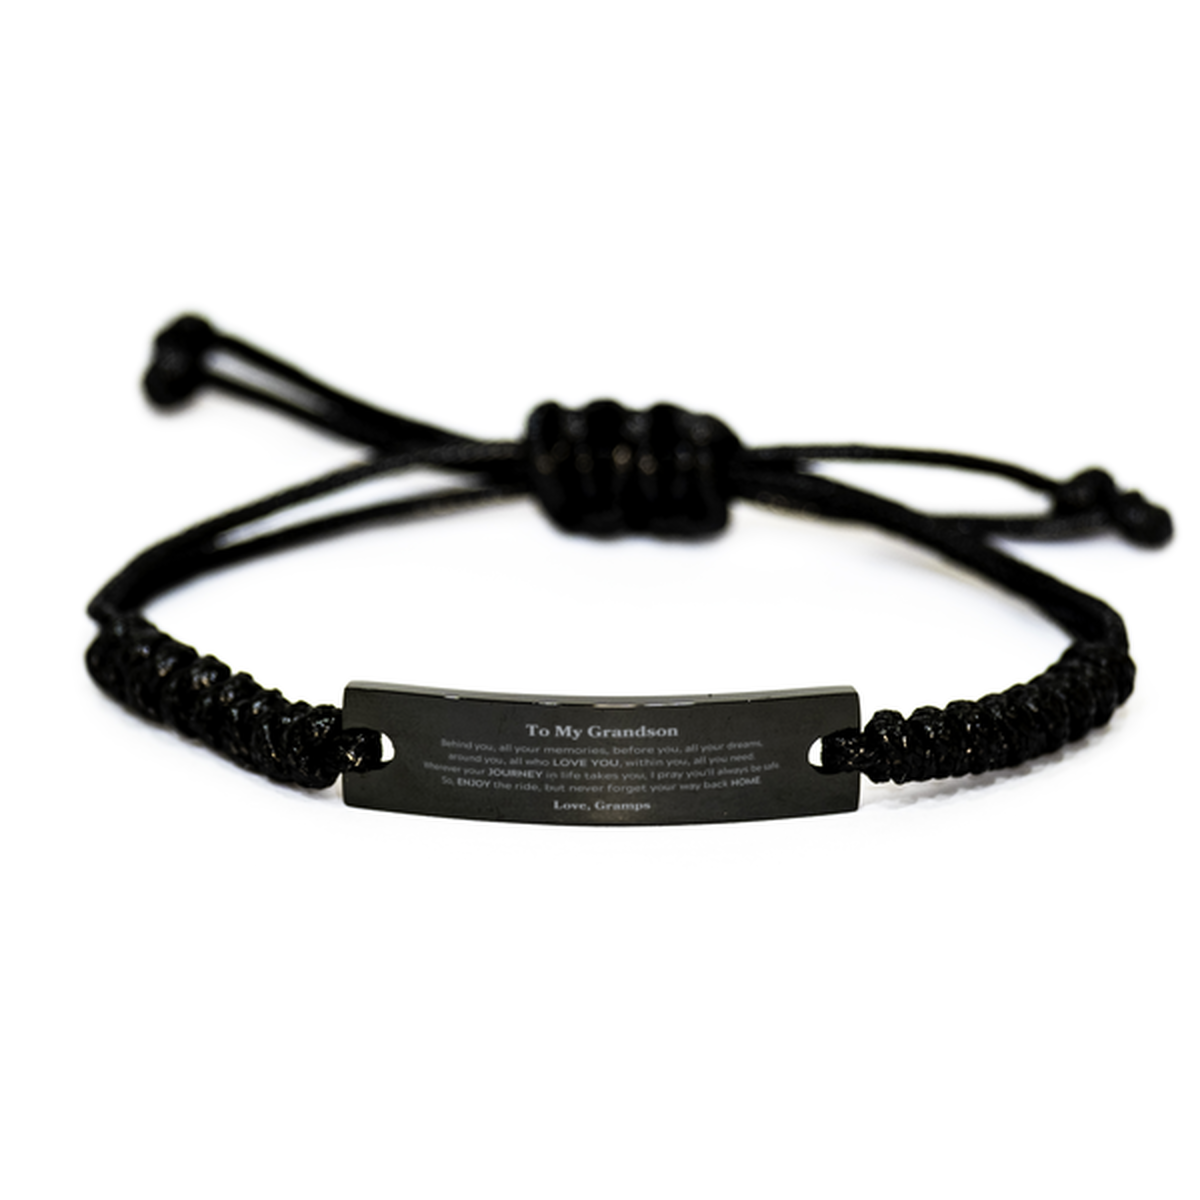 To My Grandson Graduation Gifts from Gramps, Grandson Black Rope Bracelet Christmas Birthday Gifts for Grandson Behind you, all your memories, before you, all your dreams. Love, Gramps